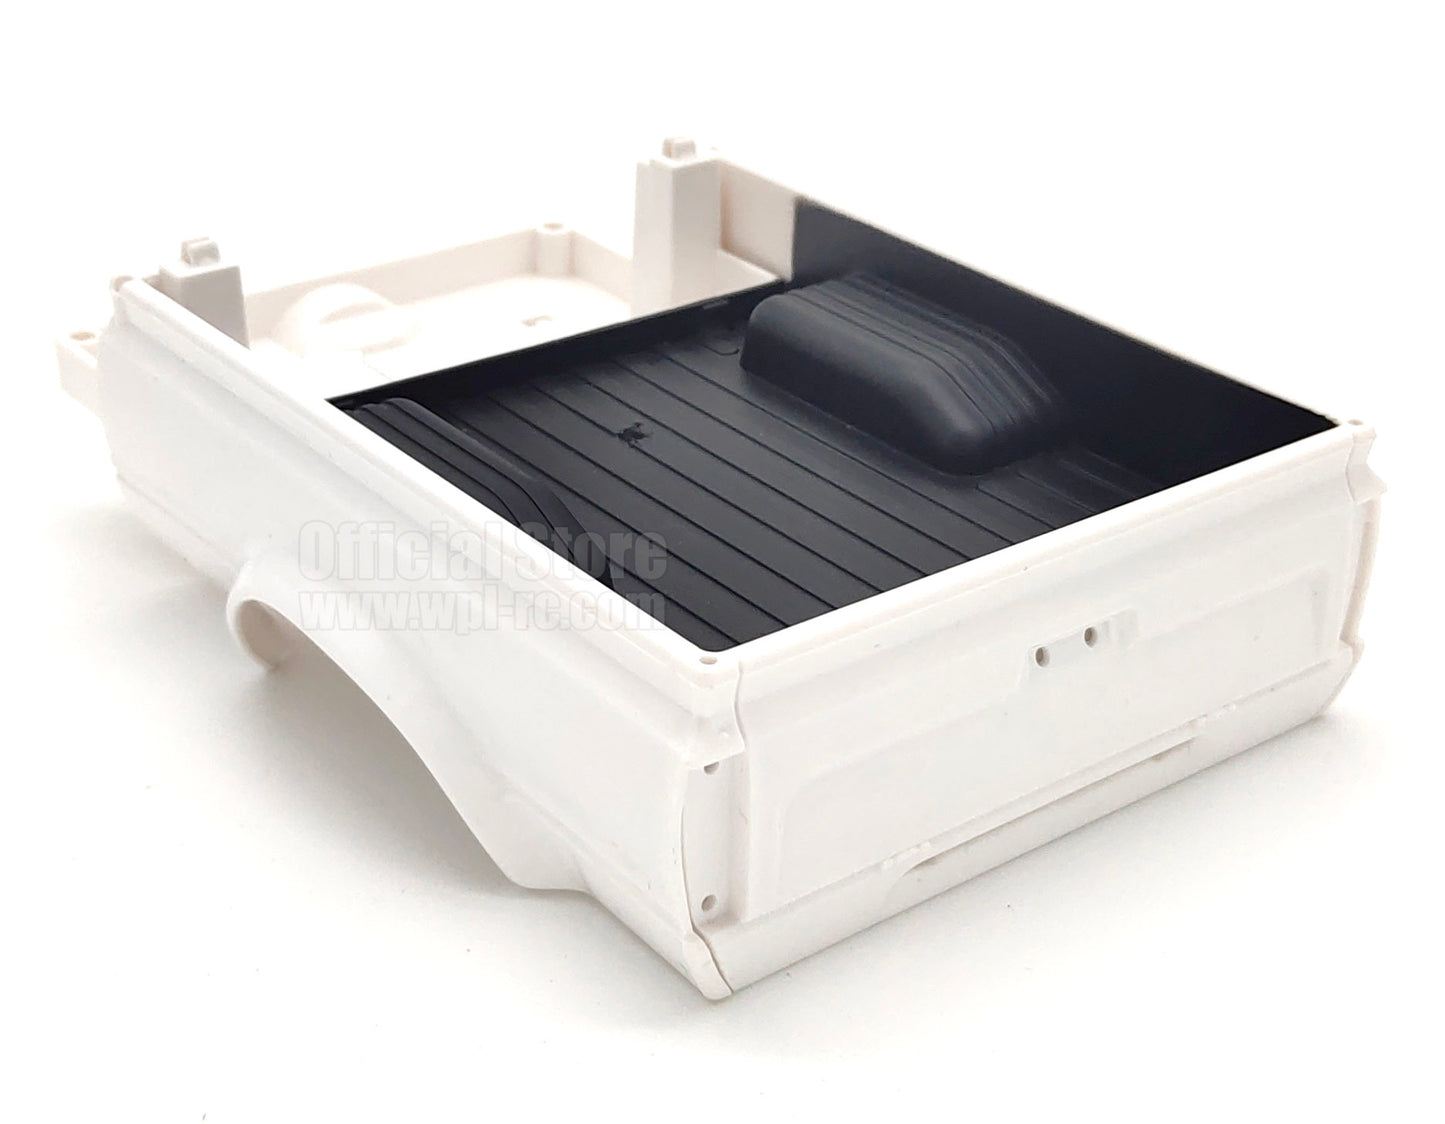 C24-1 Rear Bed White - WPL RC Official Store